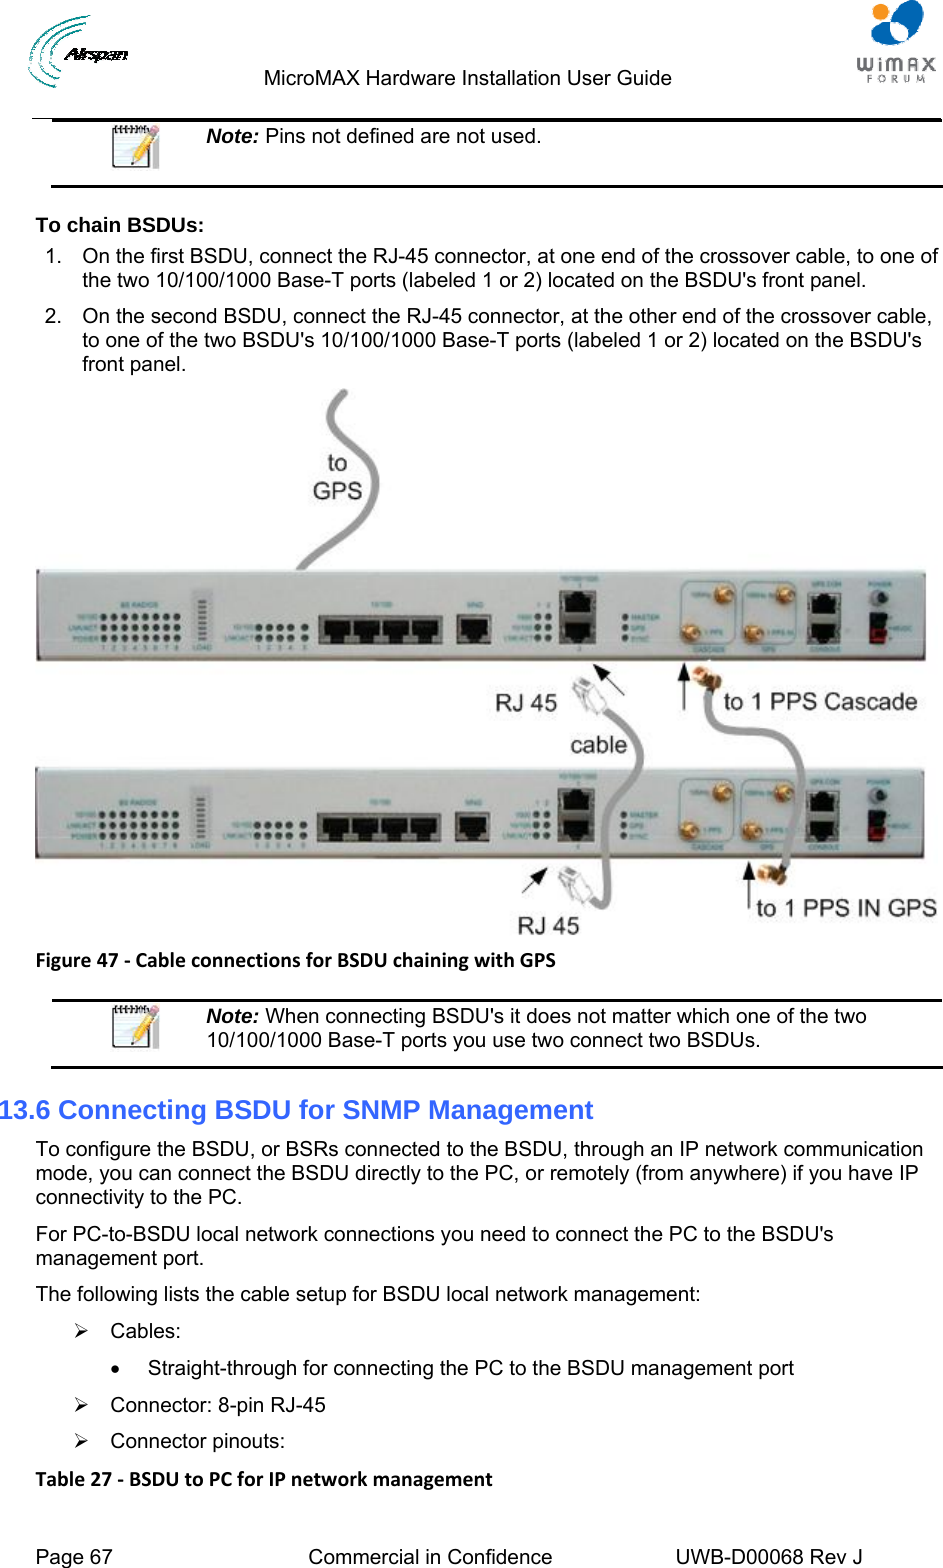                                  MicroMAX Hardware Installation User Guide  Page 67  Commercial in Confidence  UWB-D00068 Rev J    Note: Pins not defined are not used.  To chain BSDUs: 1.  On the first BSDU, connect the RJ-45 connector, at one end of the crossover cable, to one of the two 10/100/1000 Base-T ports (labeled 1 or 2) located on the BSDU&apos;s front panel. 2.  On the second BSDU, connect the RJ-45 connector, at the other end of the crossover cable, to one of the two BSDU&apos;s 10/100/1000 Base-T ports (labeled 1 or 2) located on the BSDU&apos;s front panel.  Figure47‐CableconnectionsforBSDUchainingwithGPS  Note: When connecting BSDU&apos;s it does not matter which one of the two 10/100/1000 Base-T ports you use two connect two BSDUs. 13.6 Connecting BSDU for SNMP Management To configure the BSDU, or BSRs connected to the BSDU, through an IP network communication mode, you can connect the BSDU directly to the PC, or remotely (from anywhere) if you have IP connectivity to the PC. For PC-to-BSDU local network connections you need to connect the PC to the BSDU&apos;s management port. The following lists the cable setup for BSDU local network management: ¾ Cables:   •  Straight-through for connecting the PC to the BSDU management port ¾  Connector: 8-pin RJ-45  ¾ Connector pinouts: Table27‐BSDUtoPCforIPnetworkmanagement